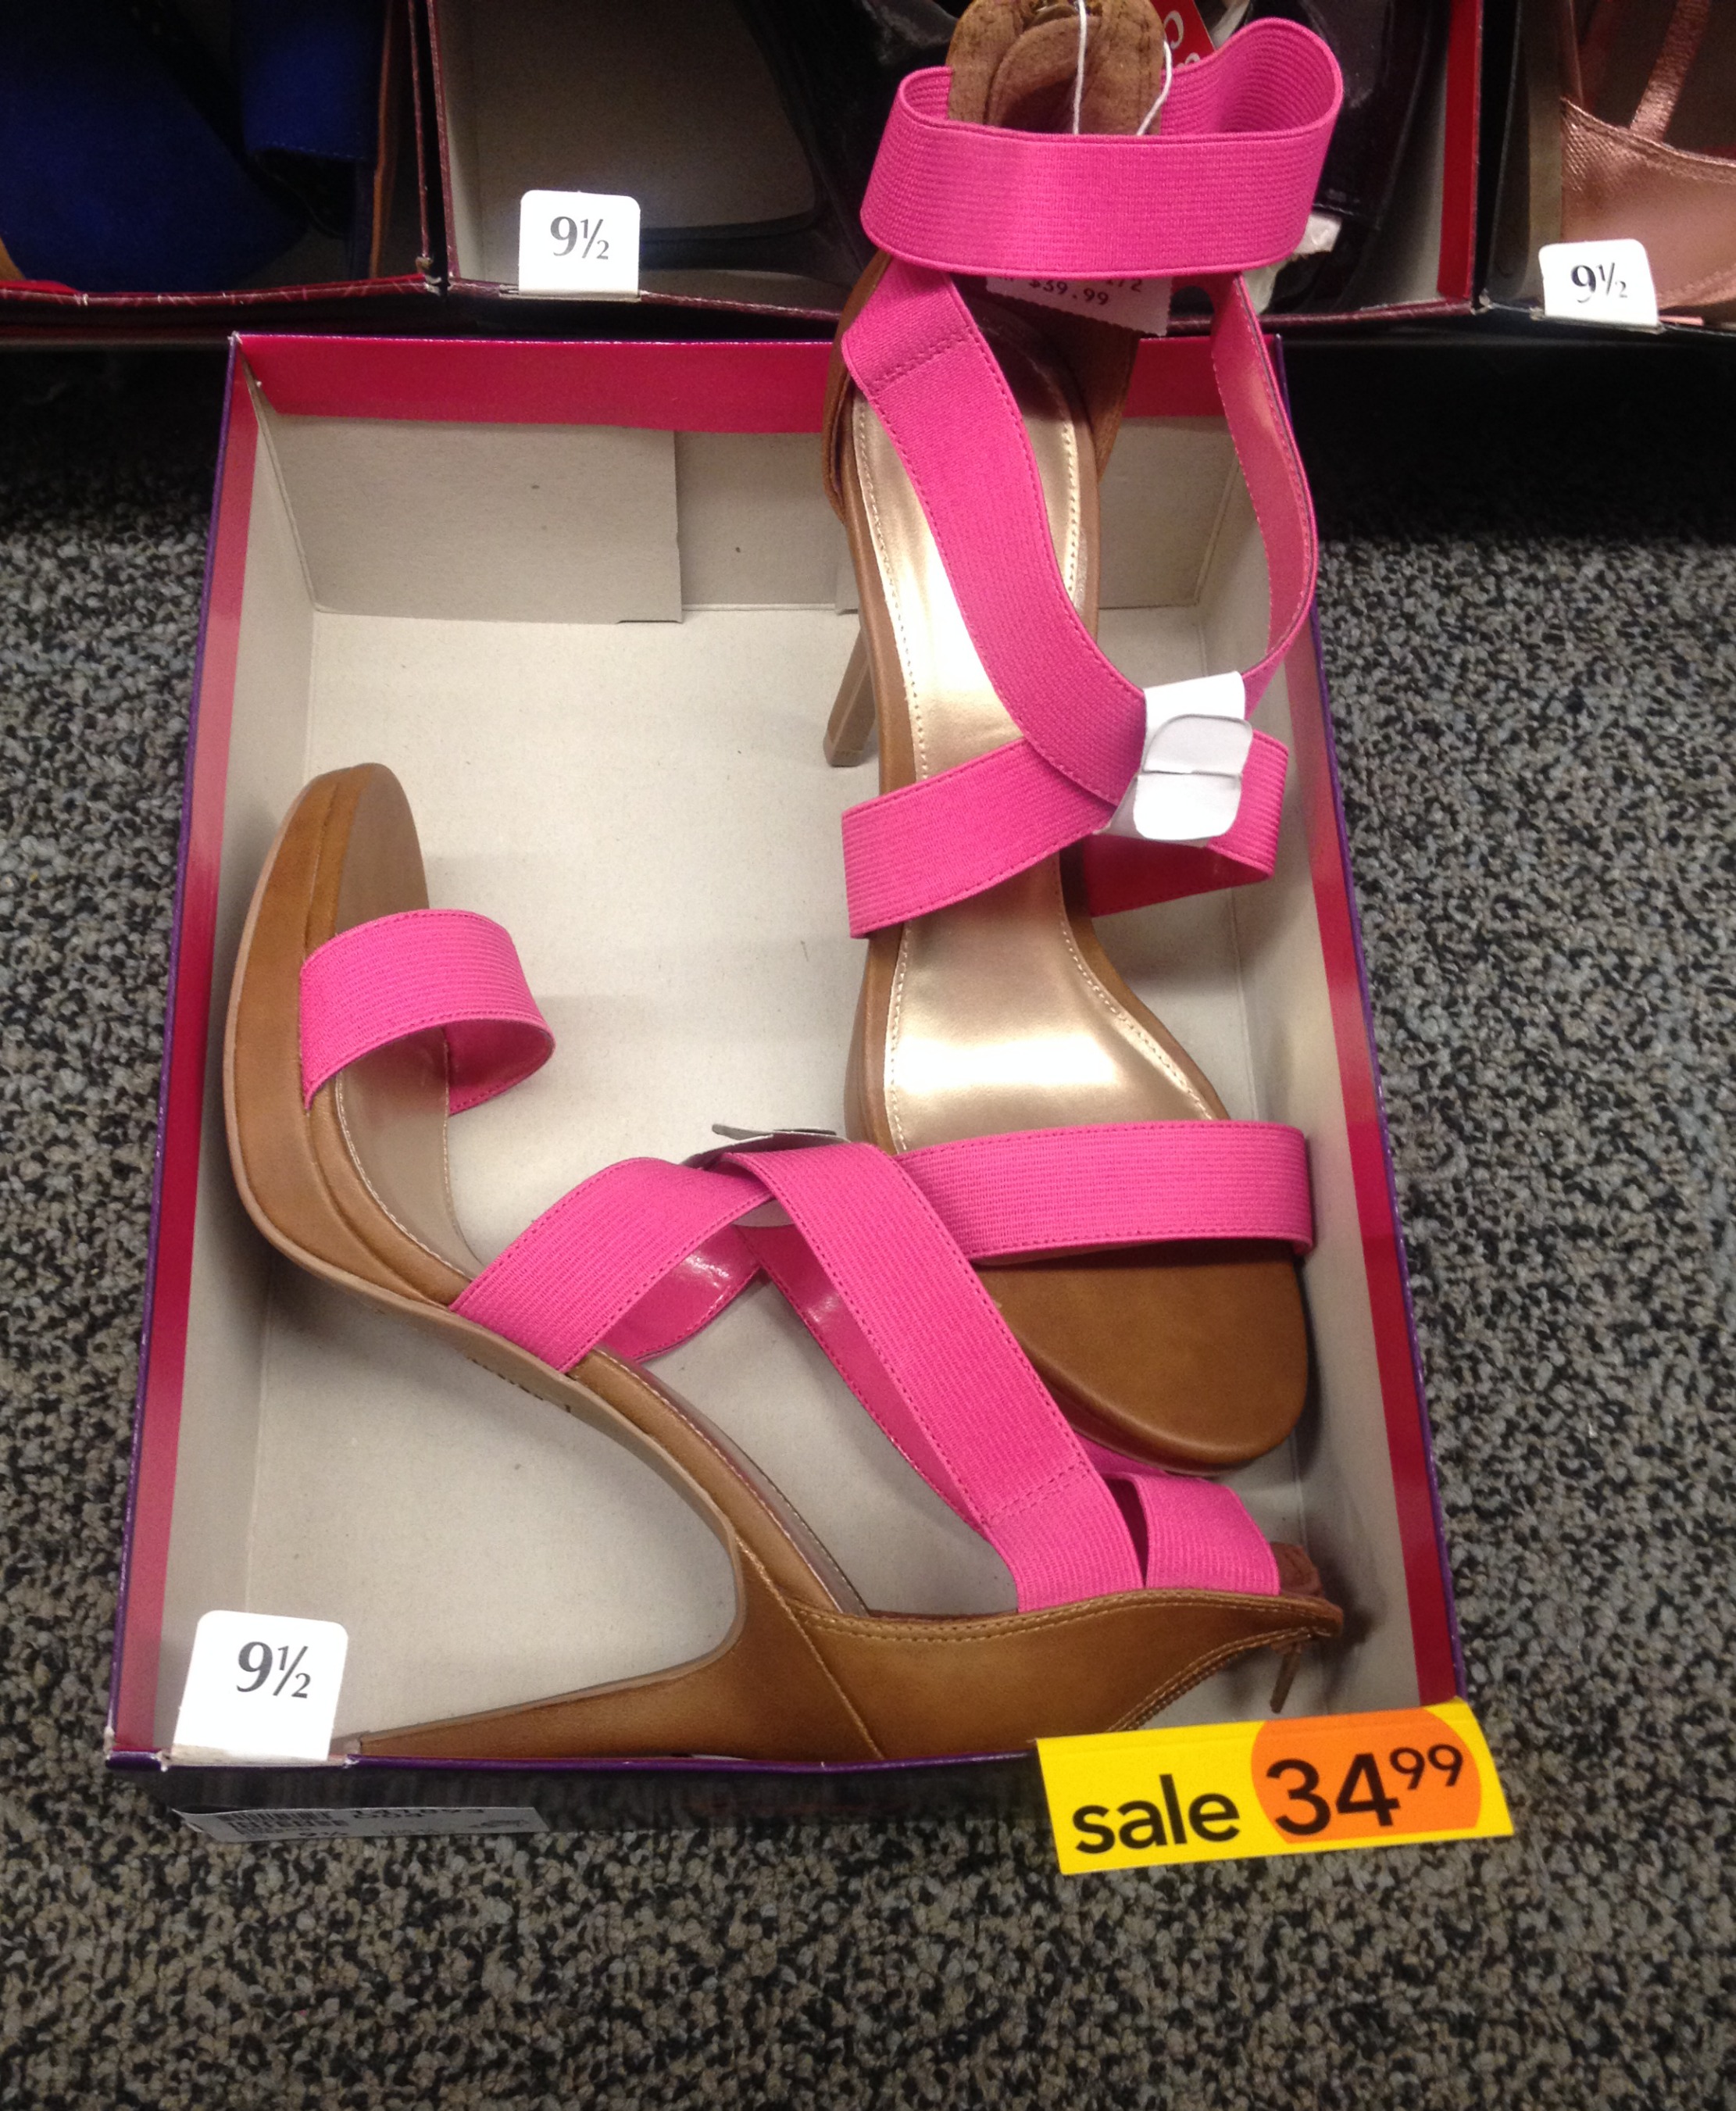 Affordable Summer Styles at Payless | Looking Fly on a Dime